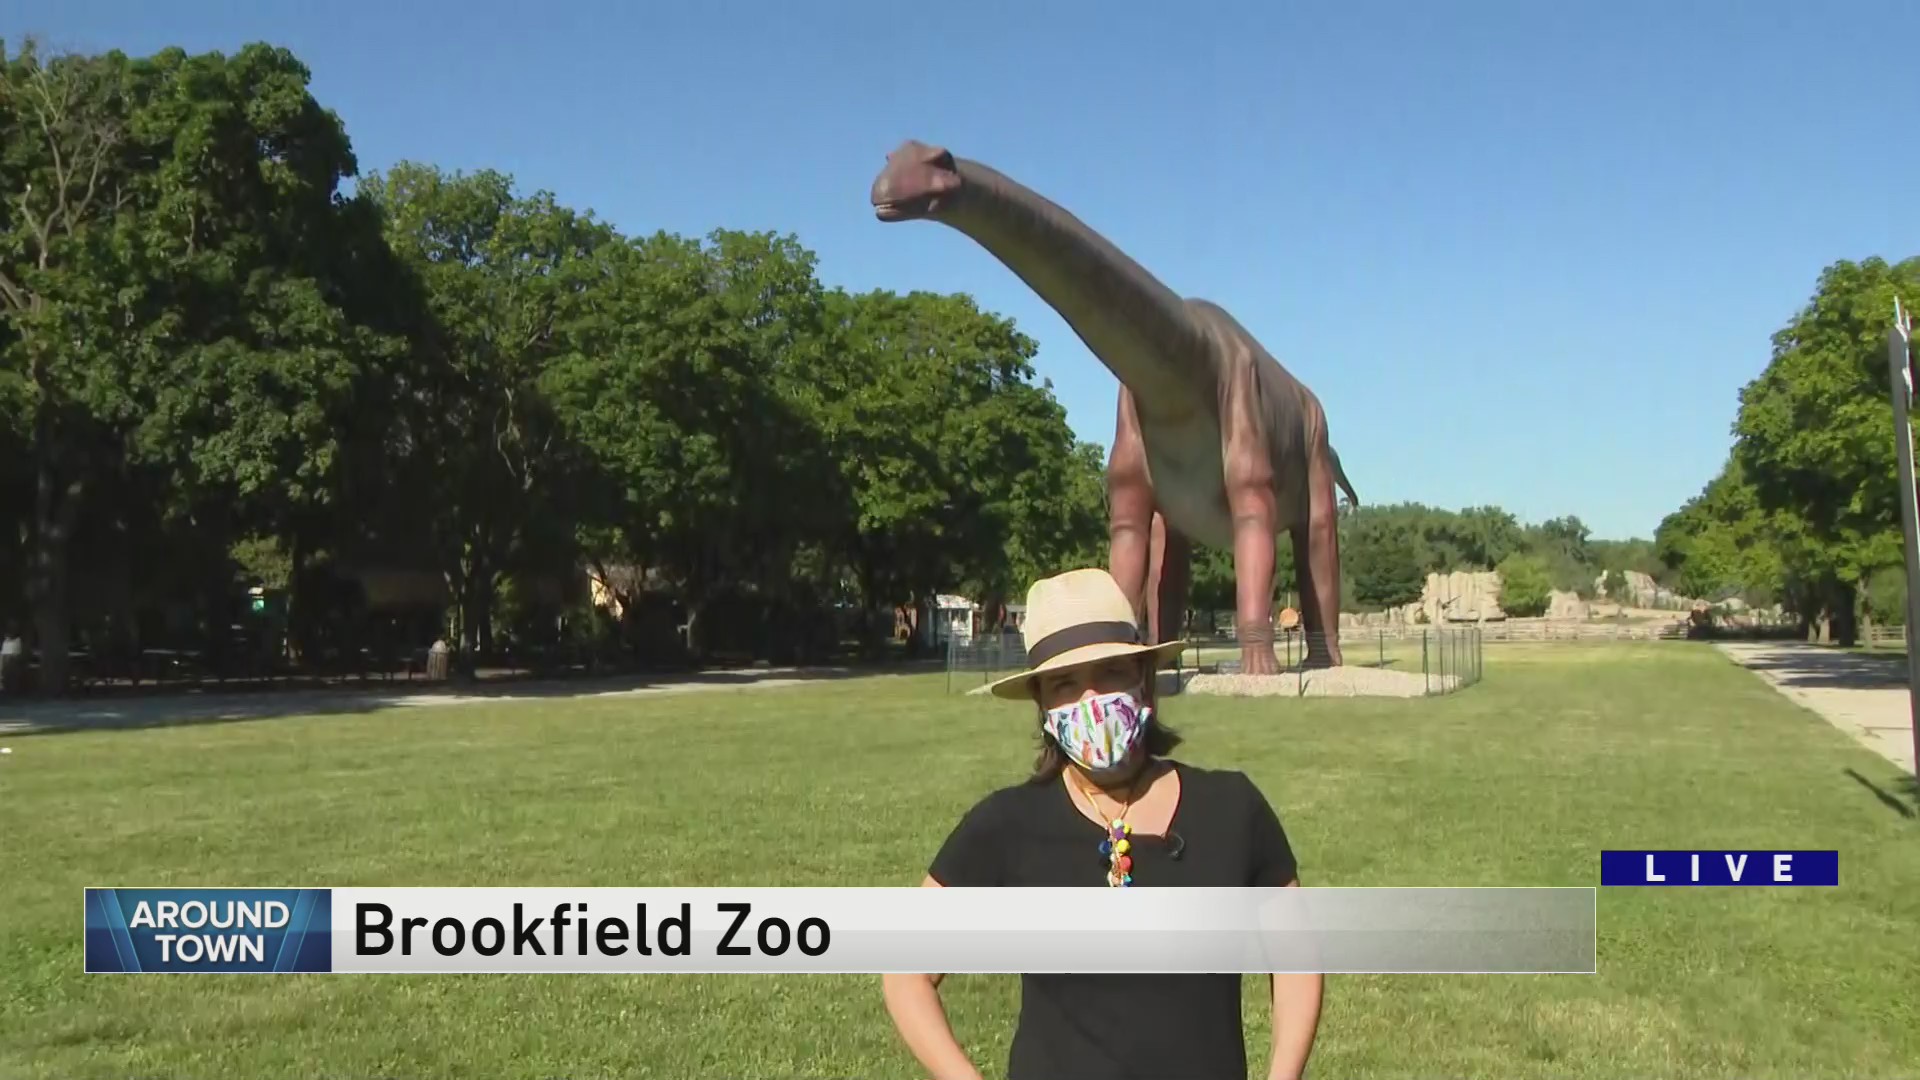 Around Town visits Brookfield Zoo and their new exhibit, ‘Dinos Everywhere!’